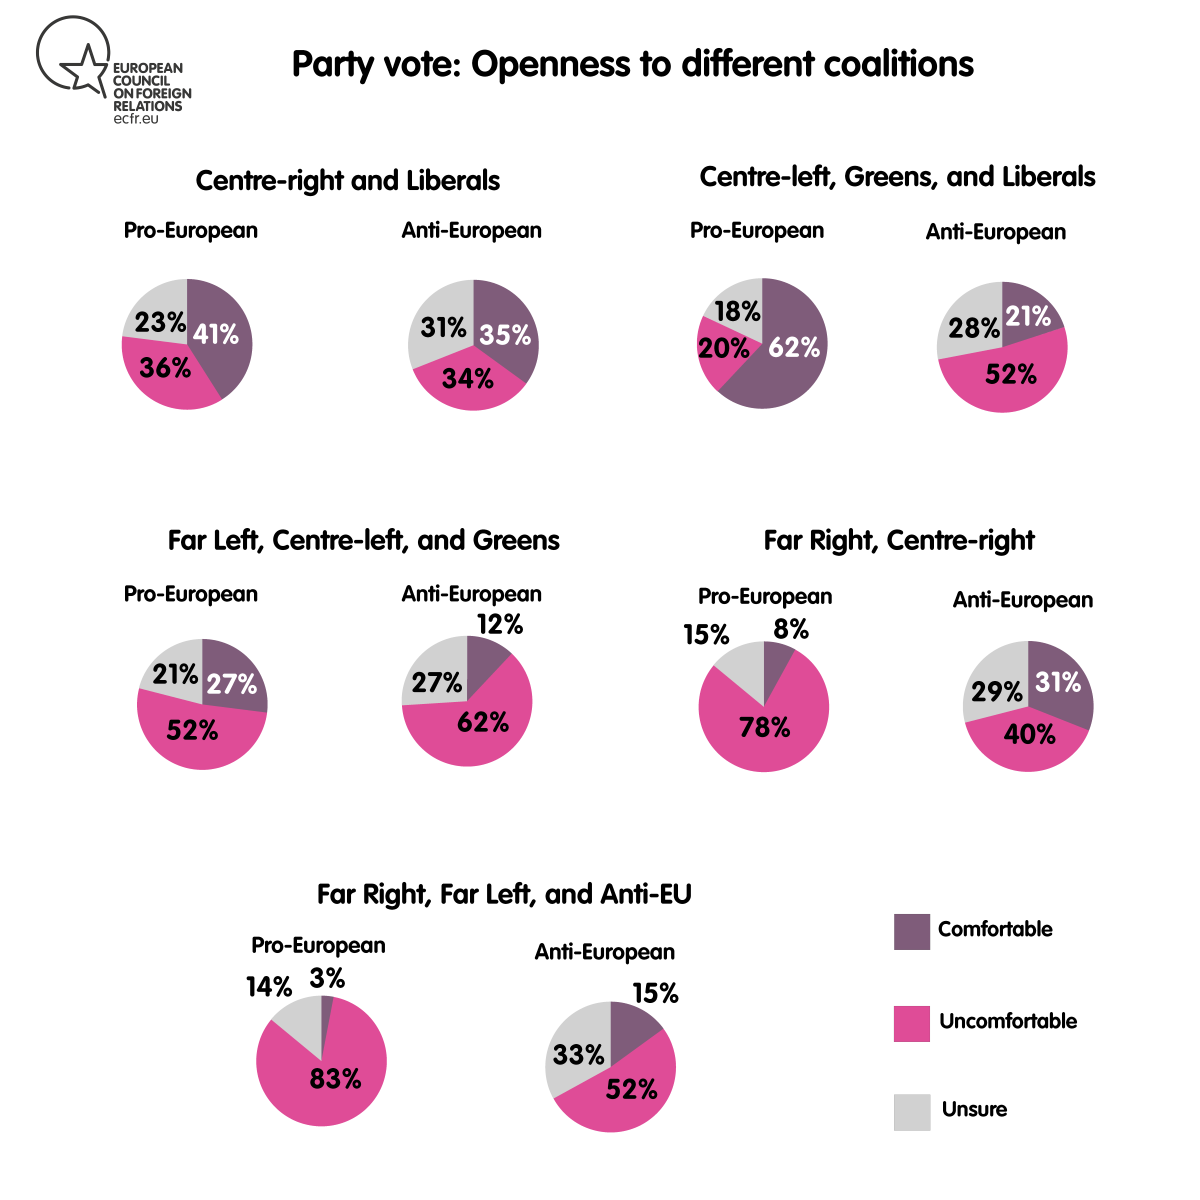 Party vote: openness to different coalitions